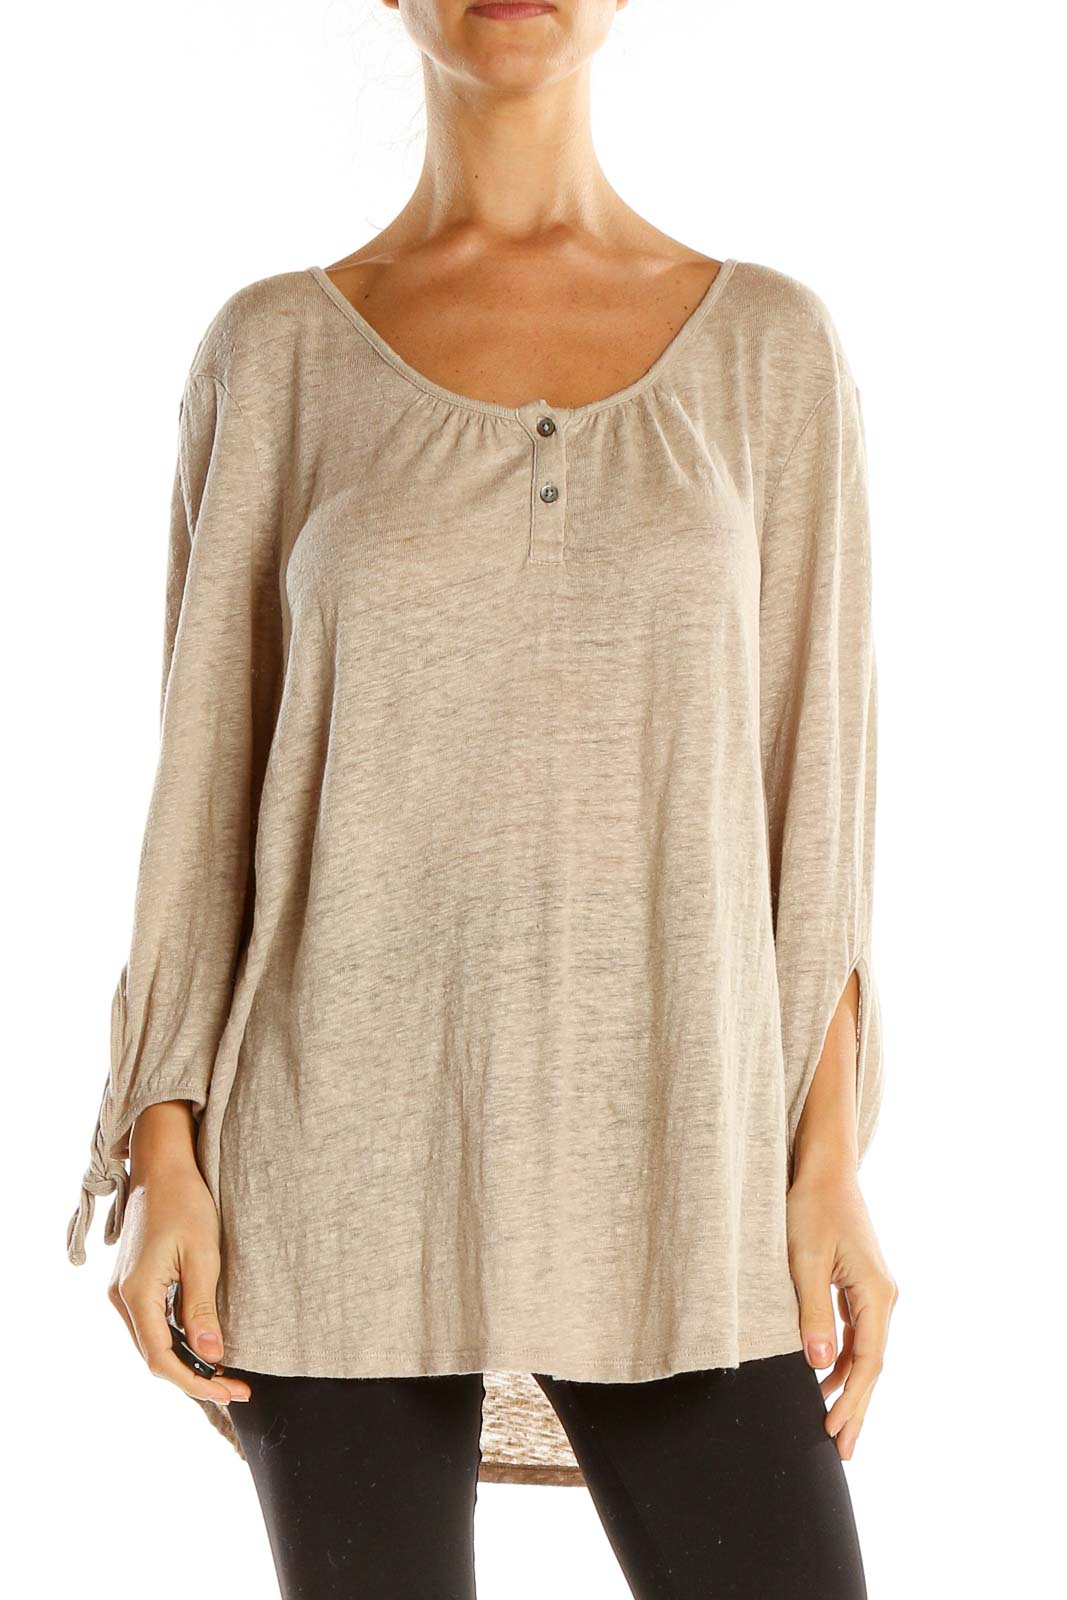 Beige All Day Wear Top Front